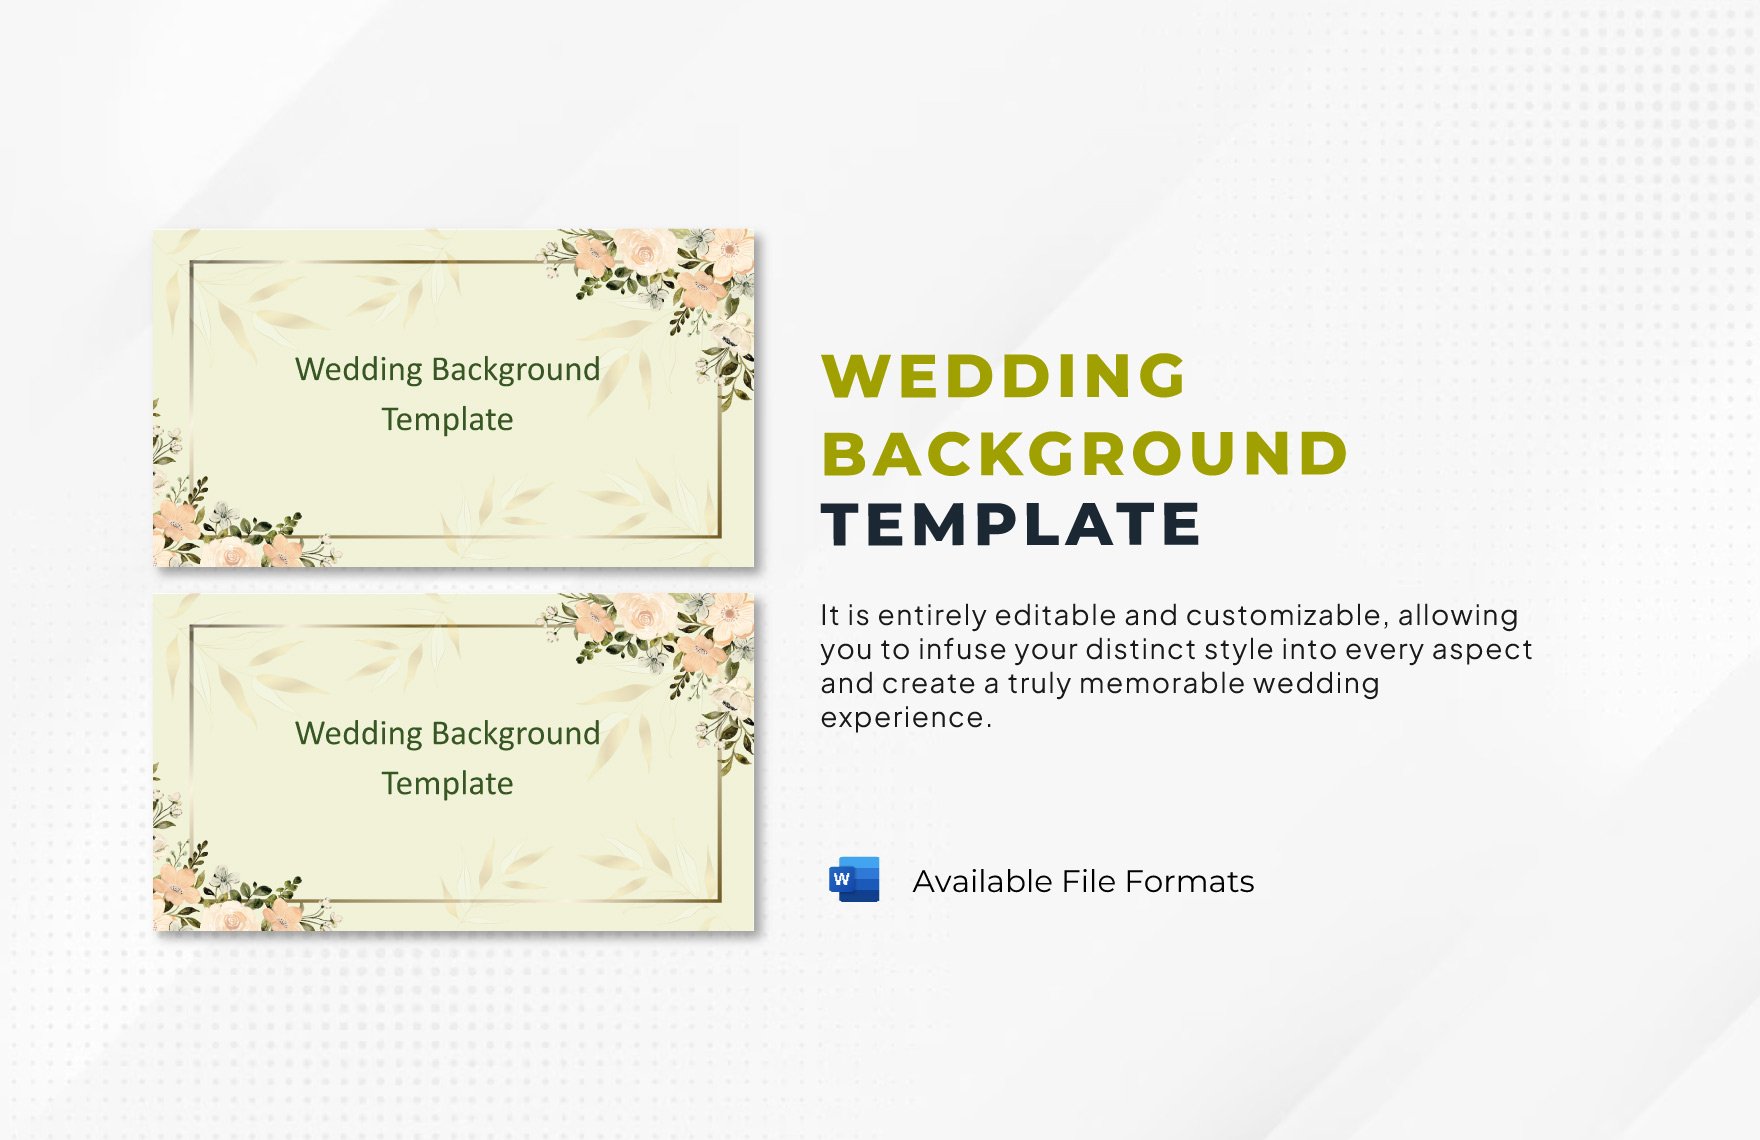 Wedding Background Template in Word